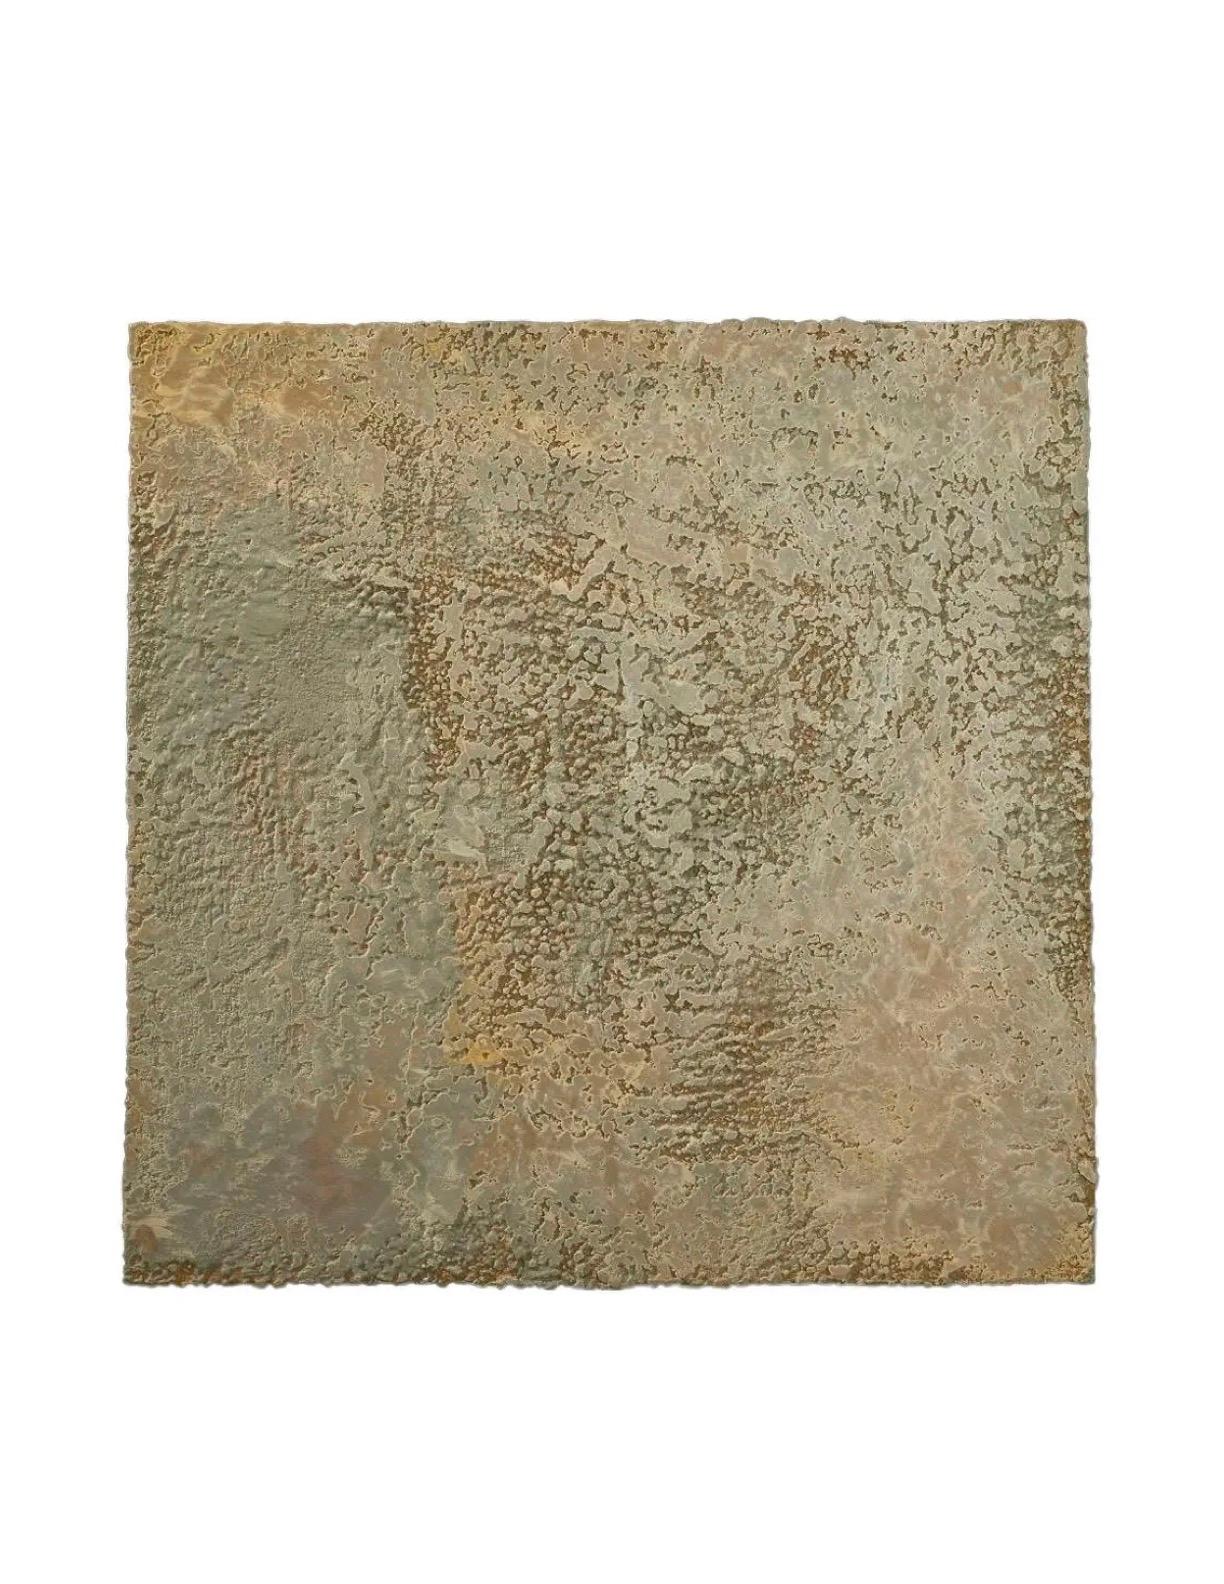 Modern Richard Hirsch Encaustic Painting of Nothing #5B, 2010 For Sale